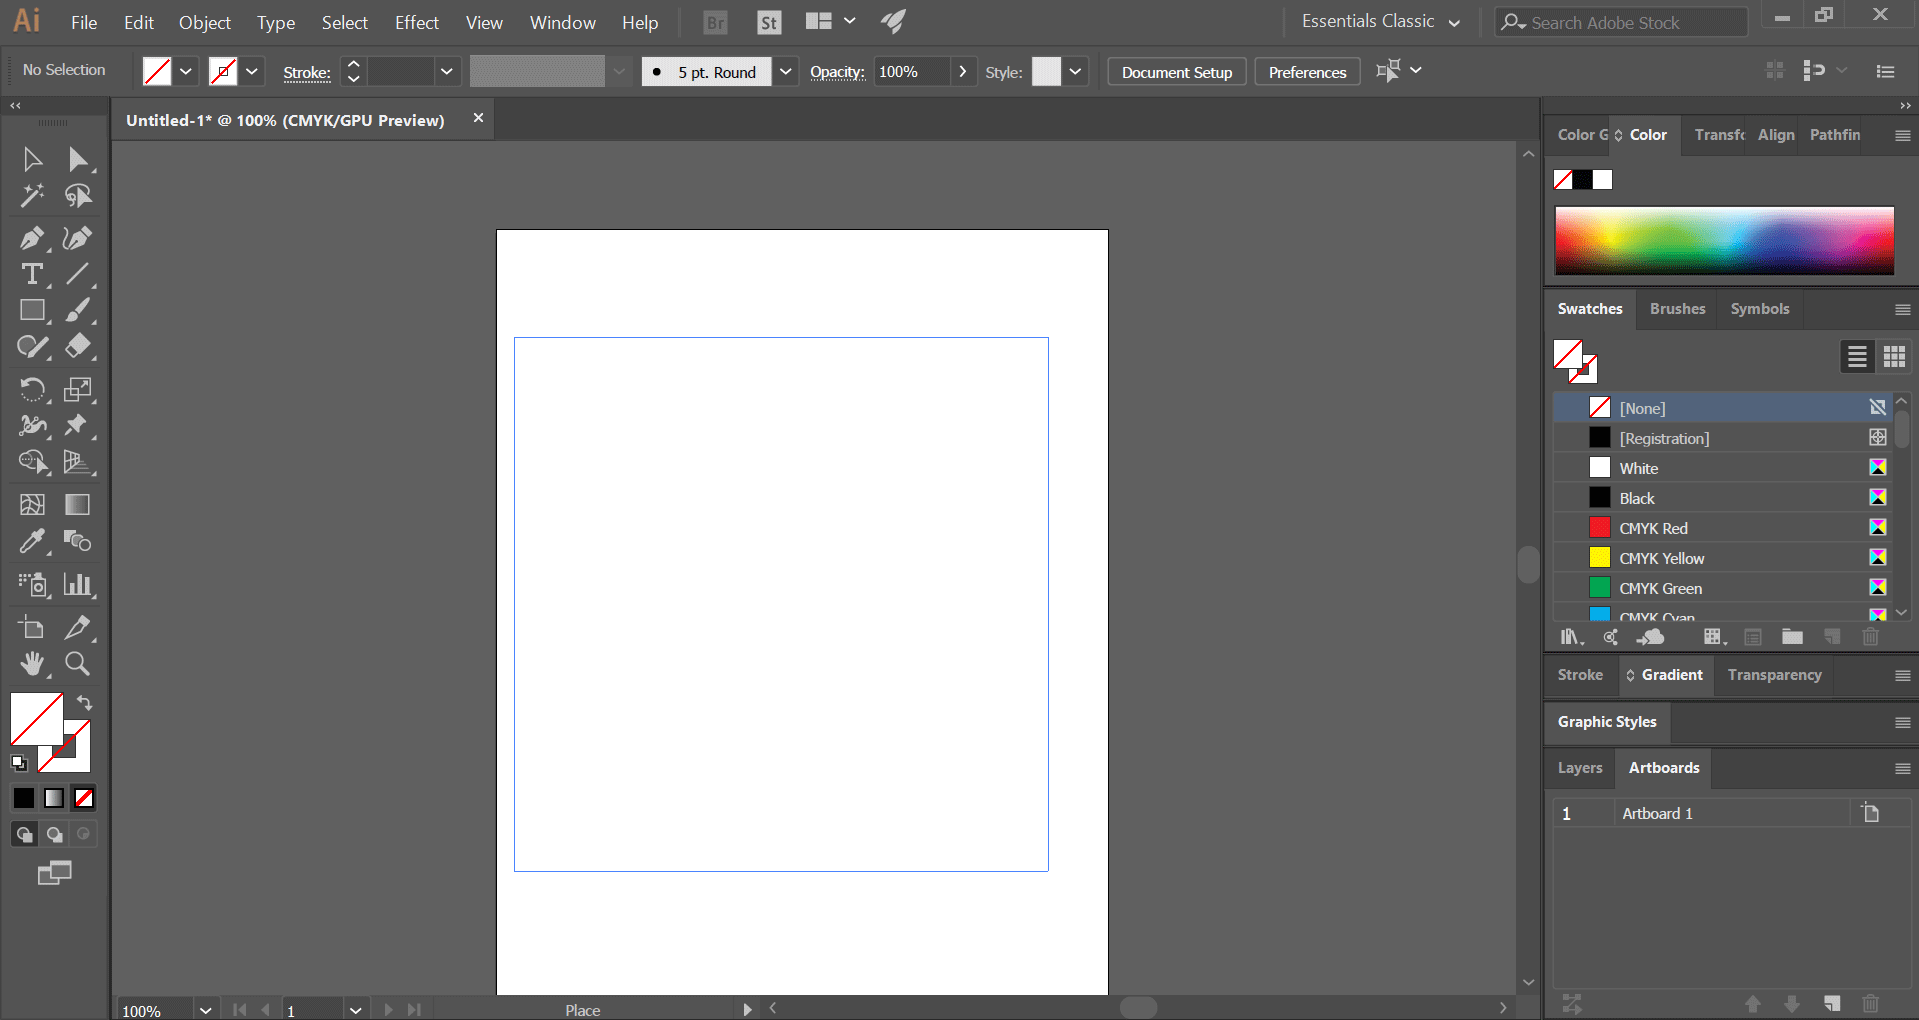 Placing the image (Insert Image in Illustrator)